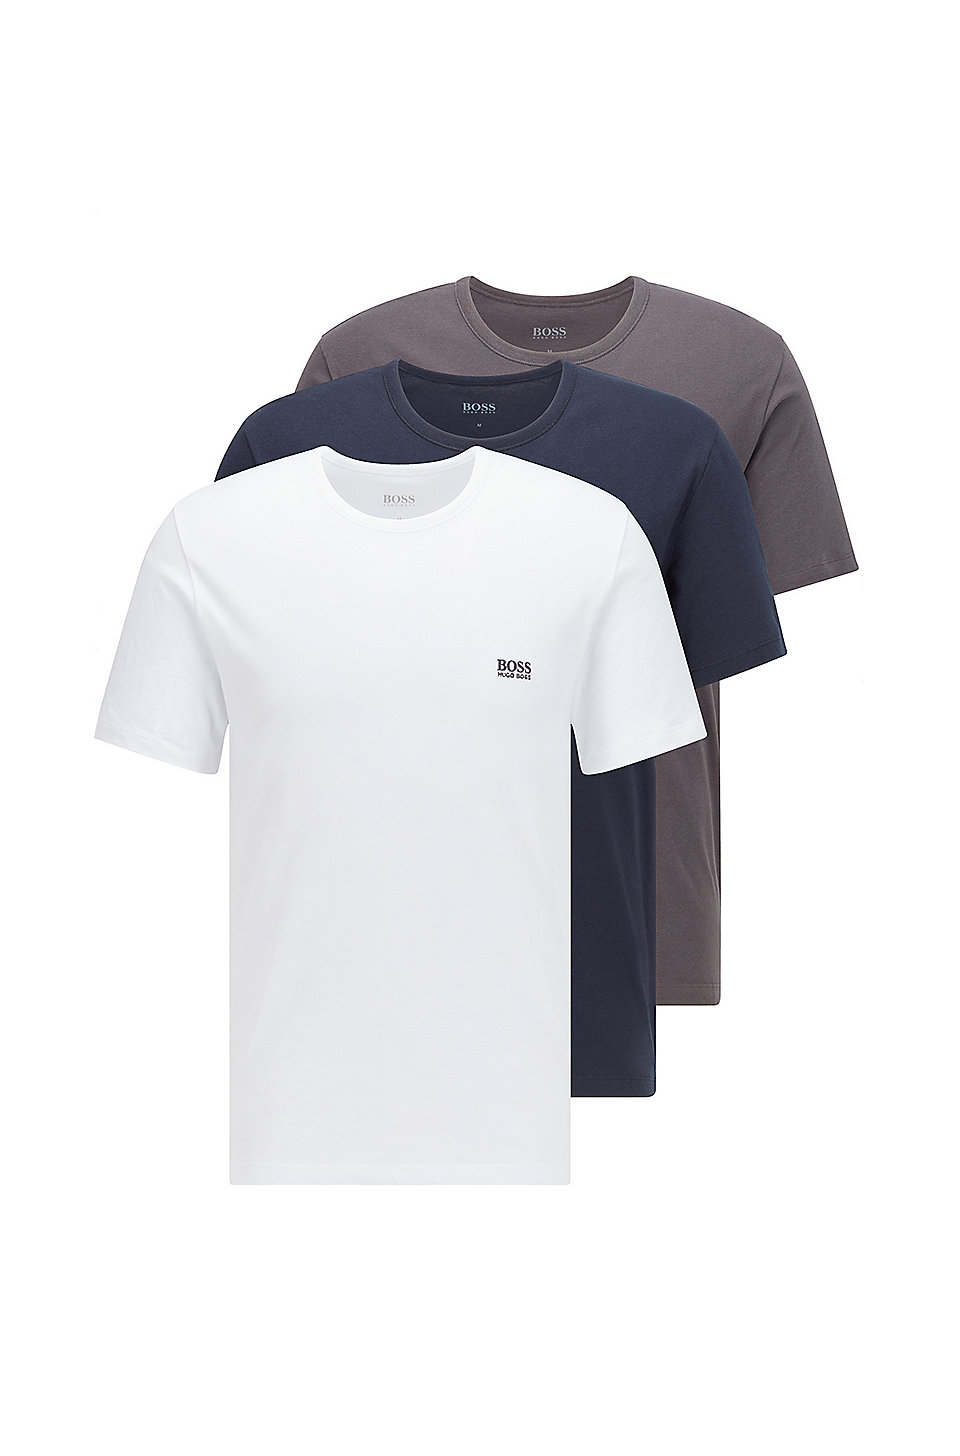 bright series Back, back, back (part BOSS - Three-pack of regular-fit cotton T-shirts